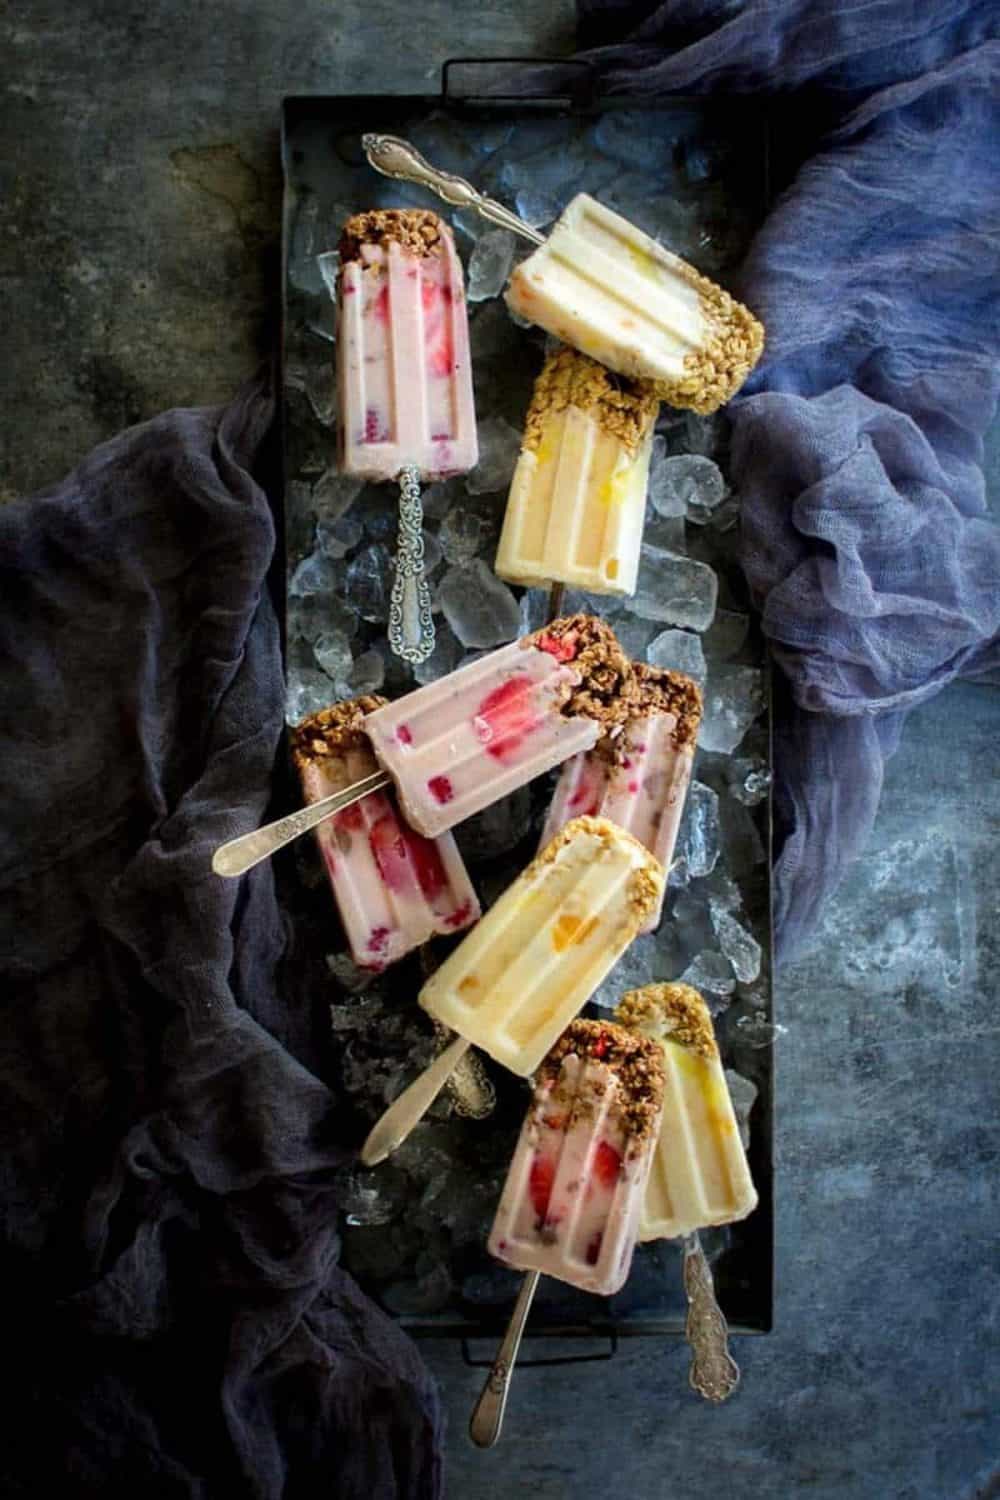 A tray of yogurt and granola popsicles.